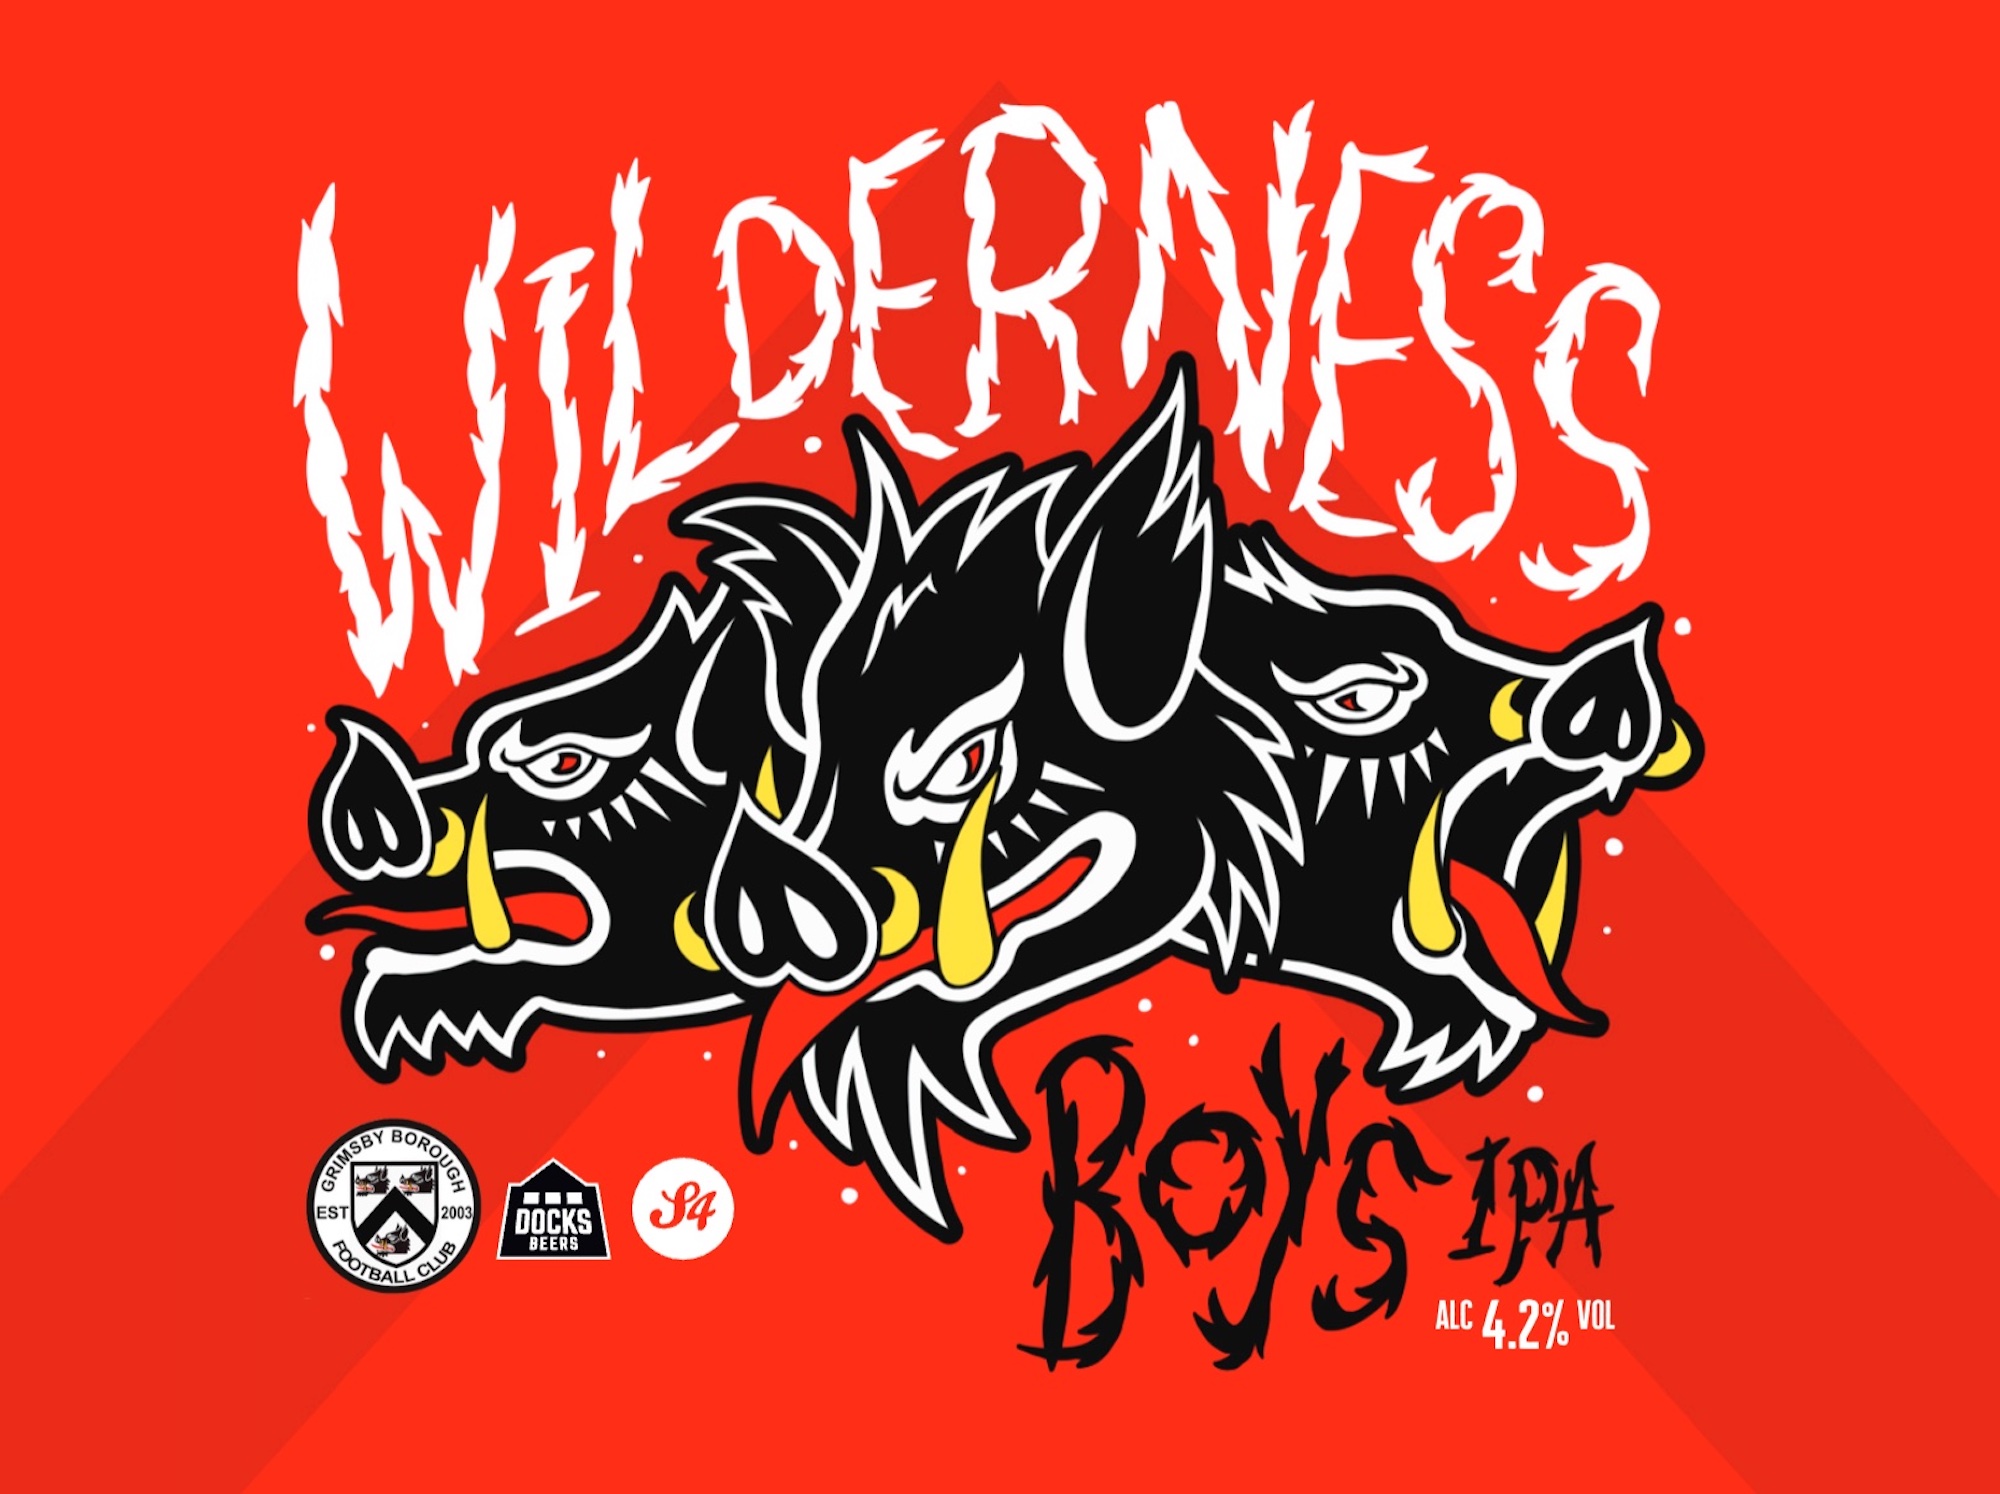 The logo for wilderness boys pale ale